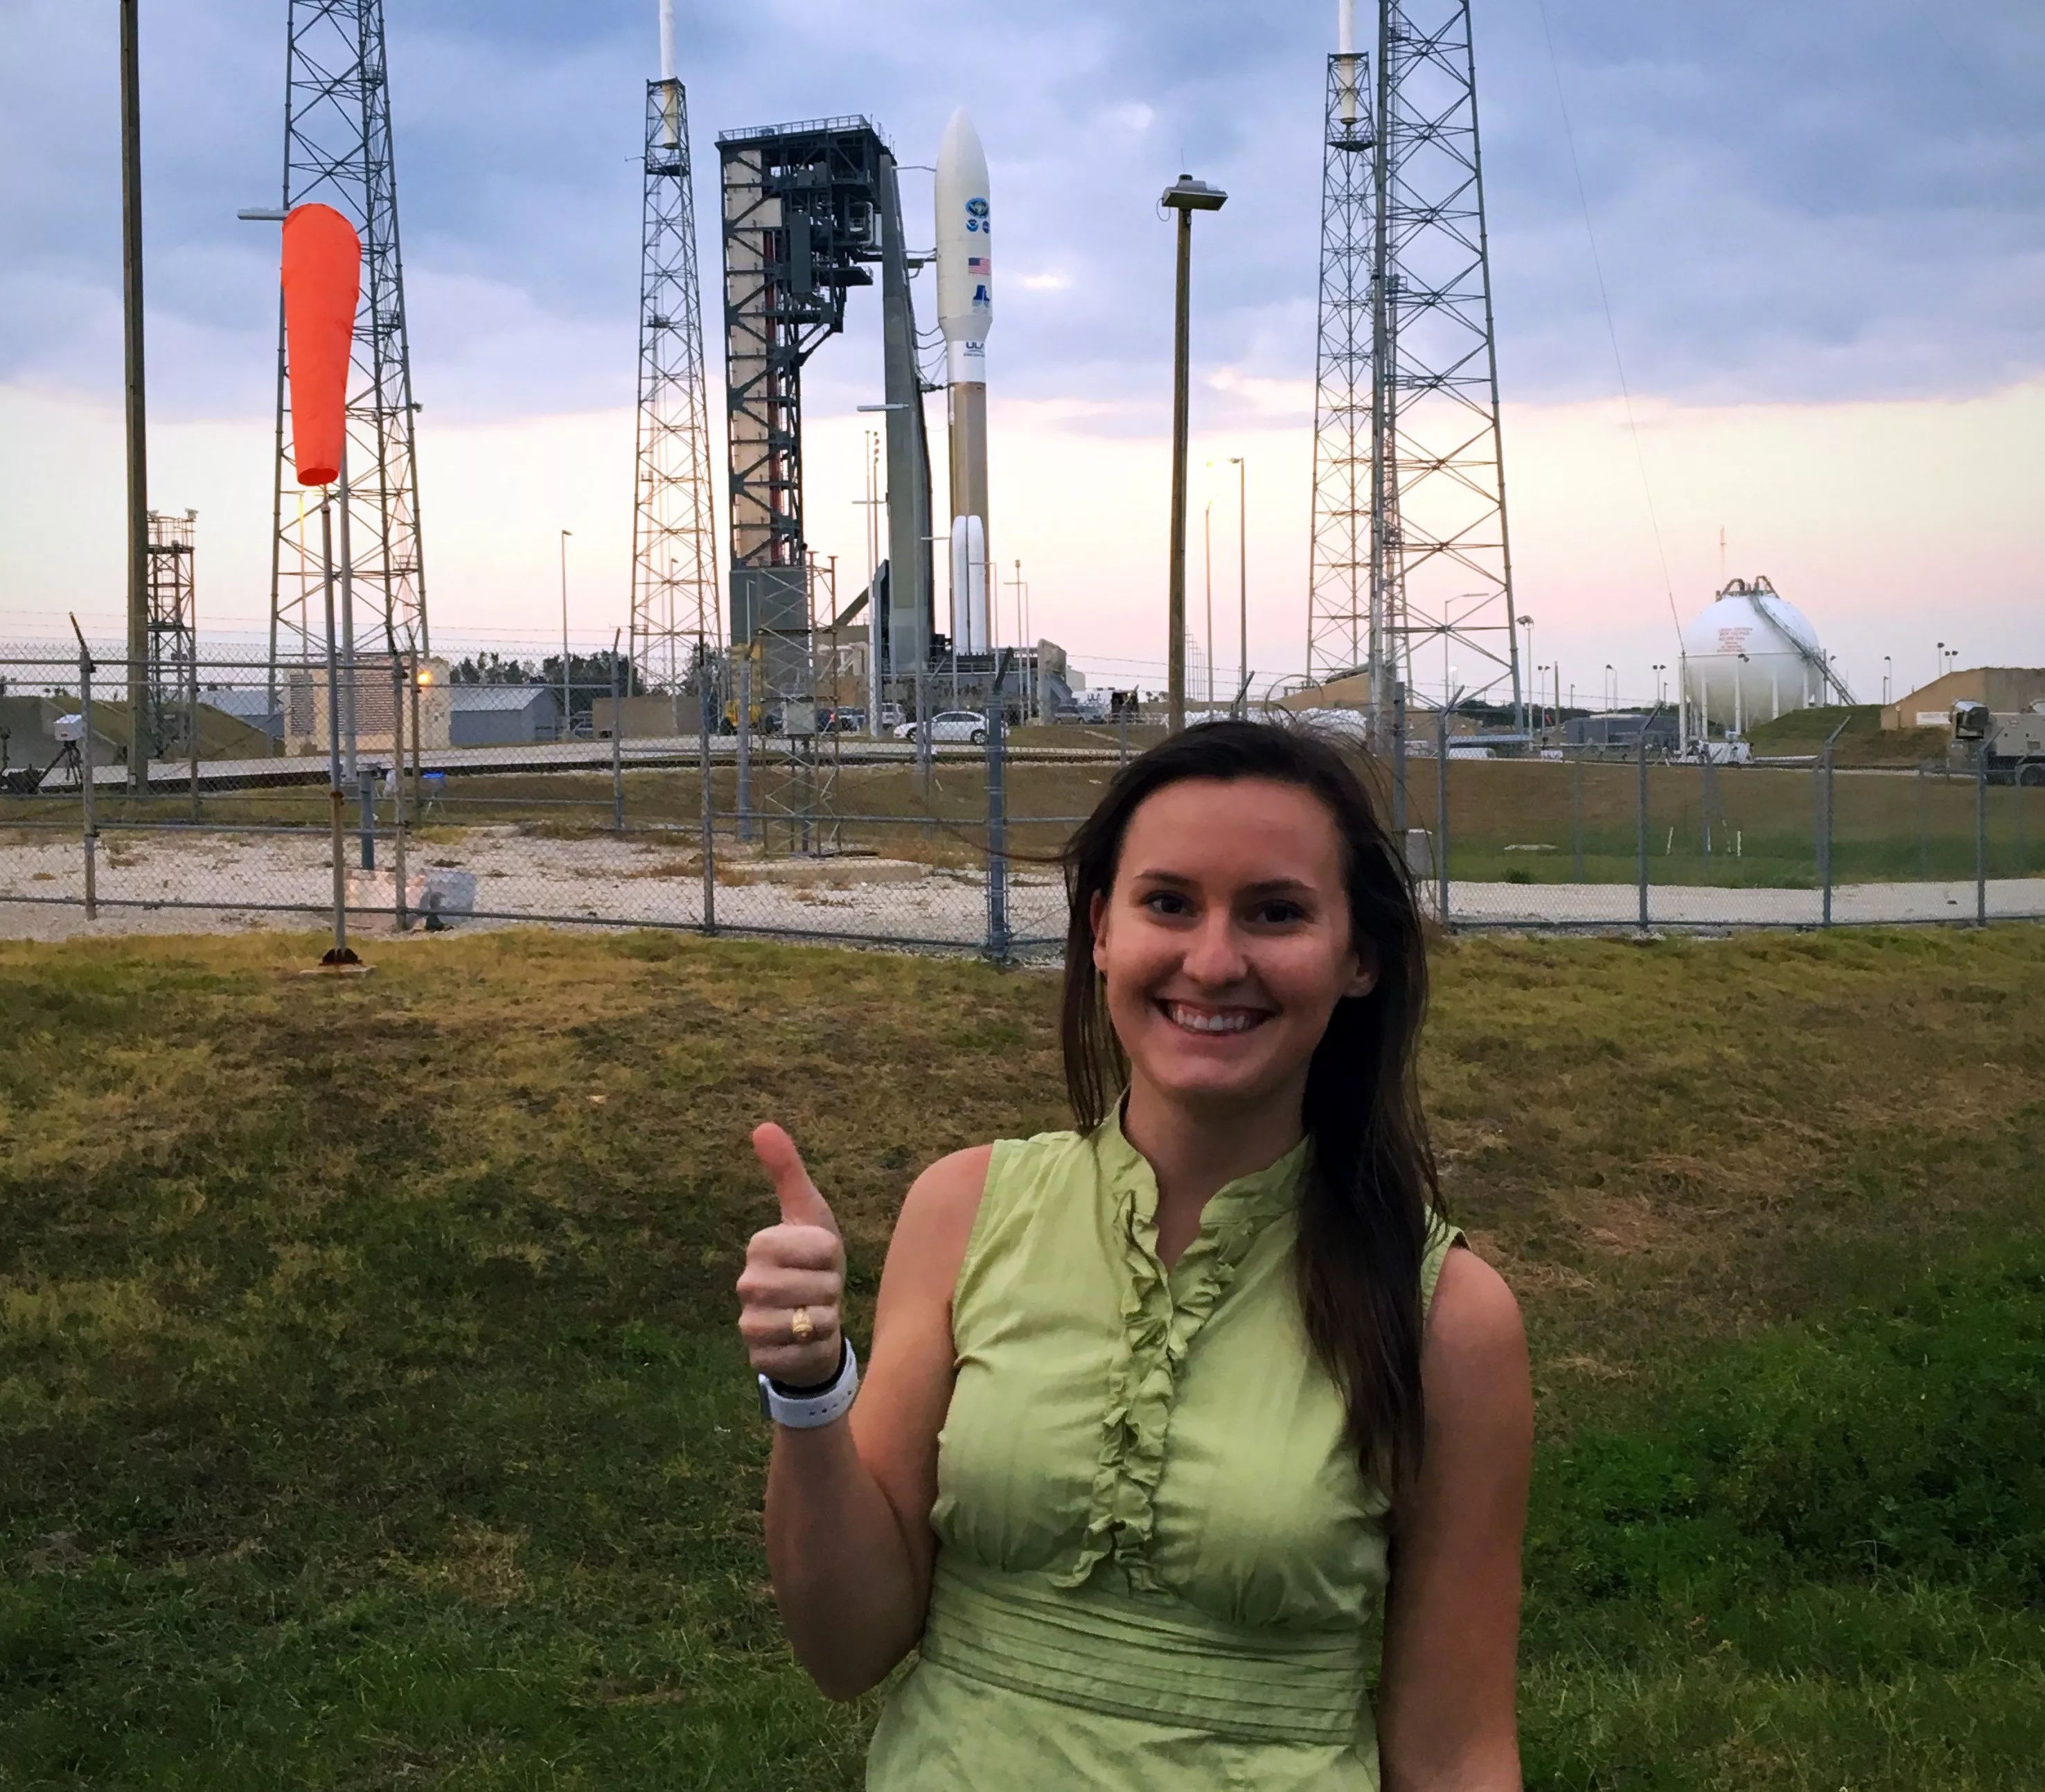 Dr. Stephanie Stevenson at the launch complex for NOAA’s GOES-R satellite at Cape Canaveral Space Force Station in November 2016.